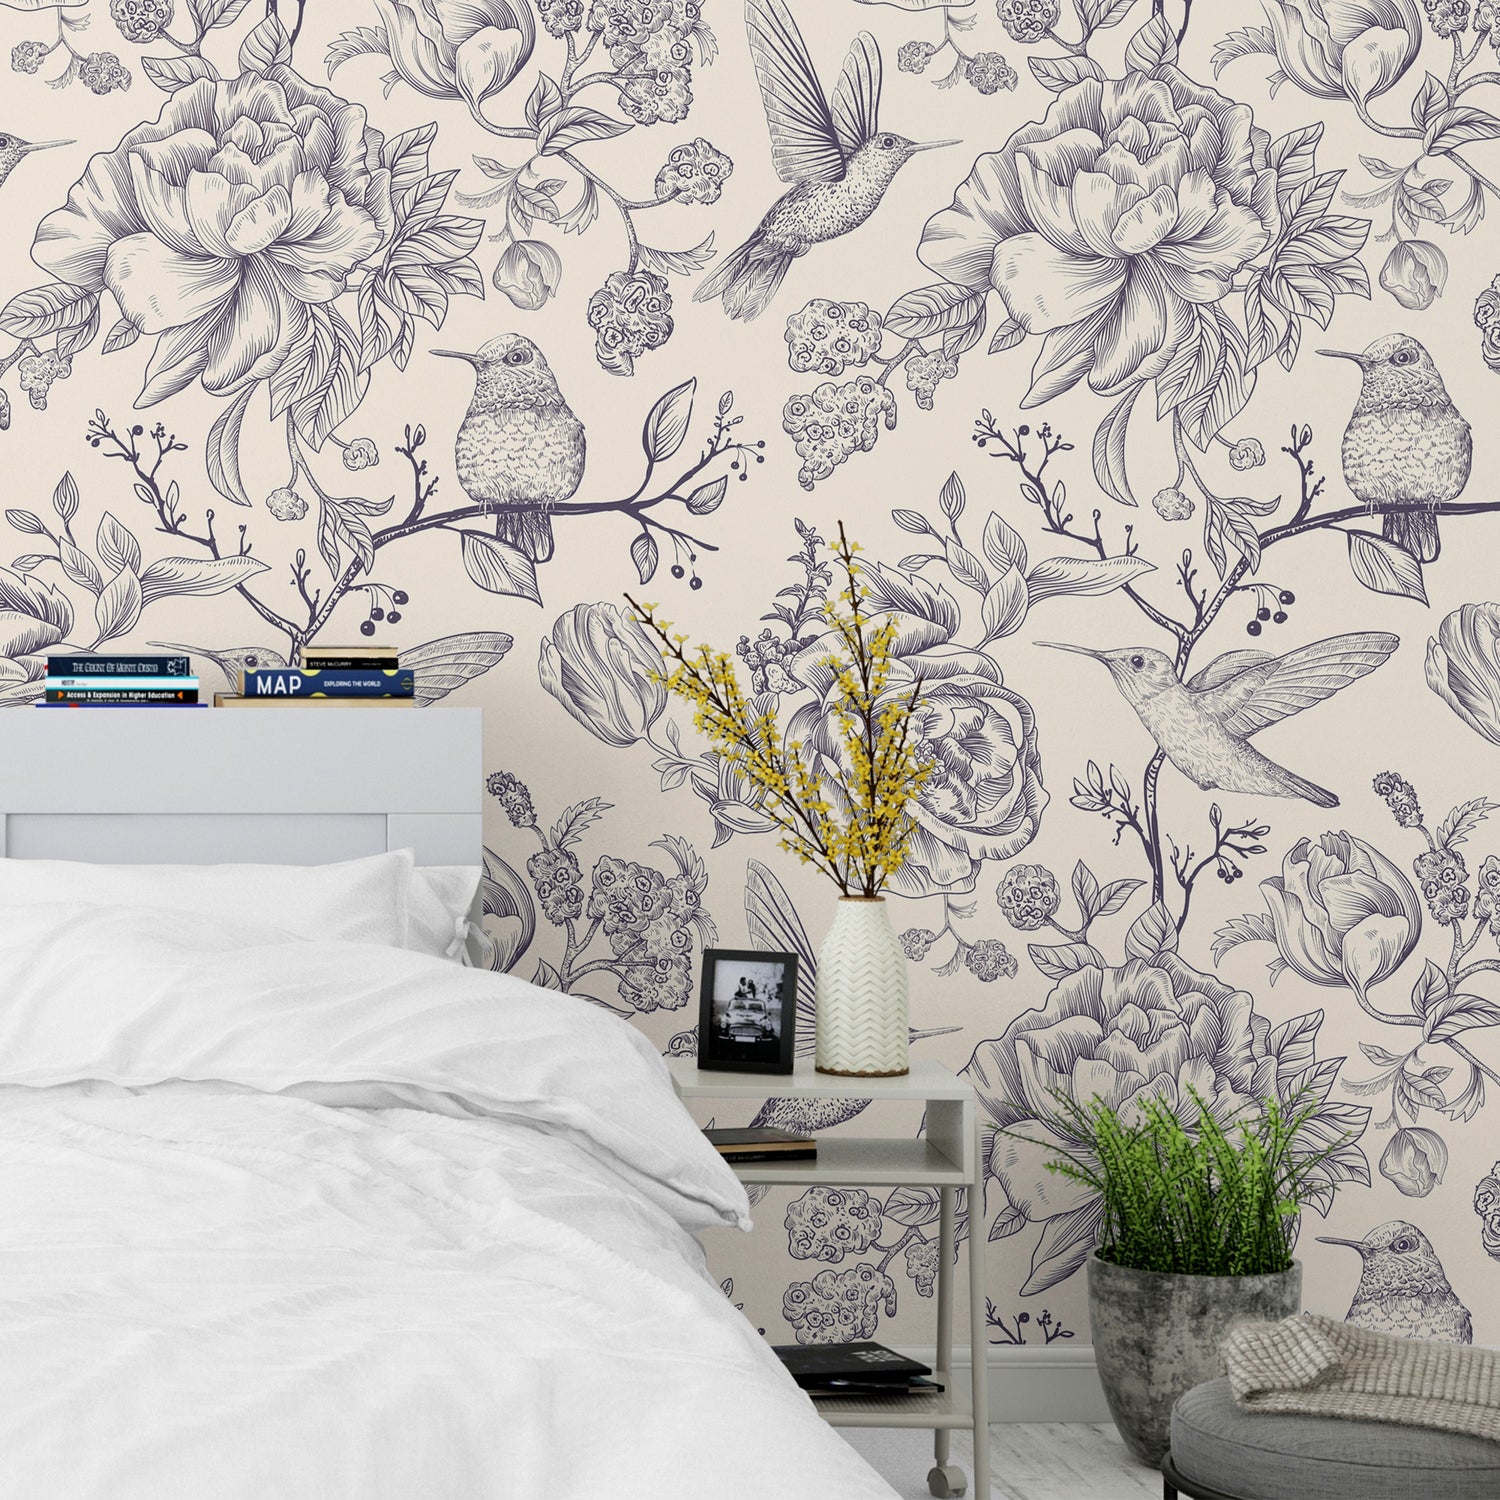 Floral wallpaper with birds, chinoiserie vintage style wallpaper, botanical mural, peel and stick or traditional wallpaper